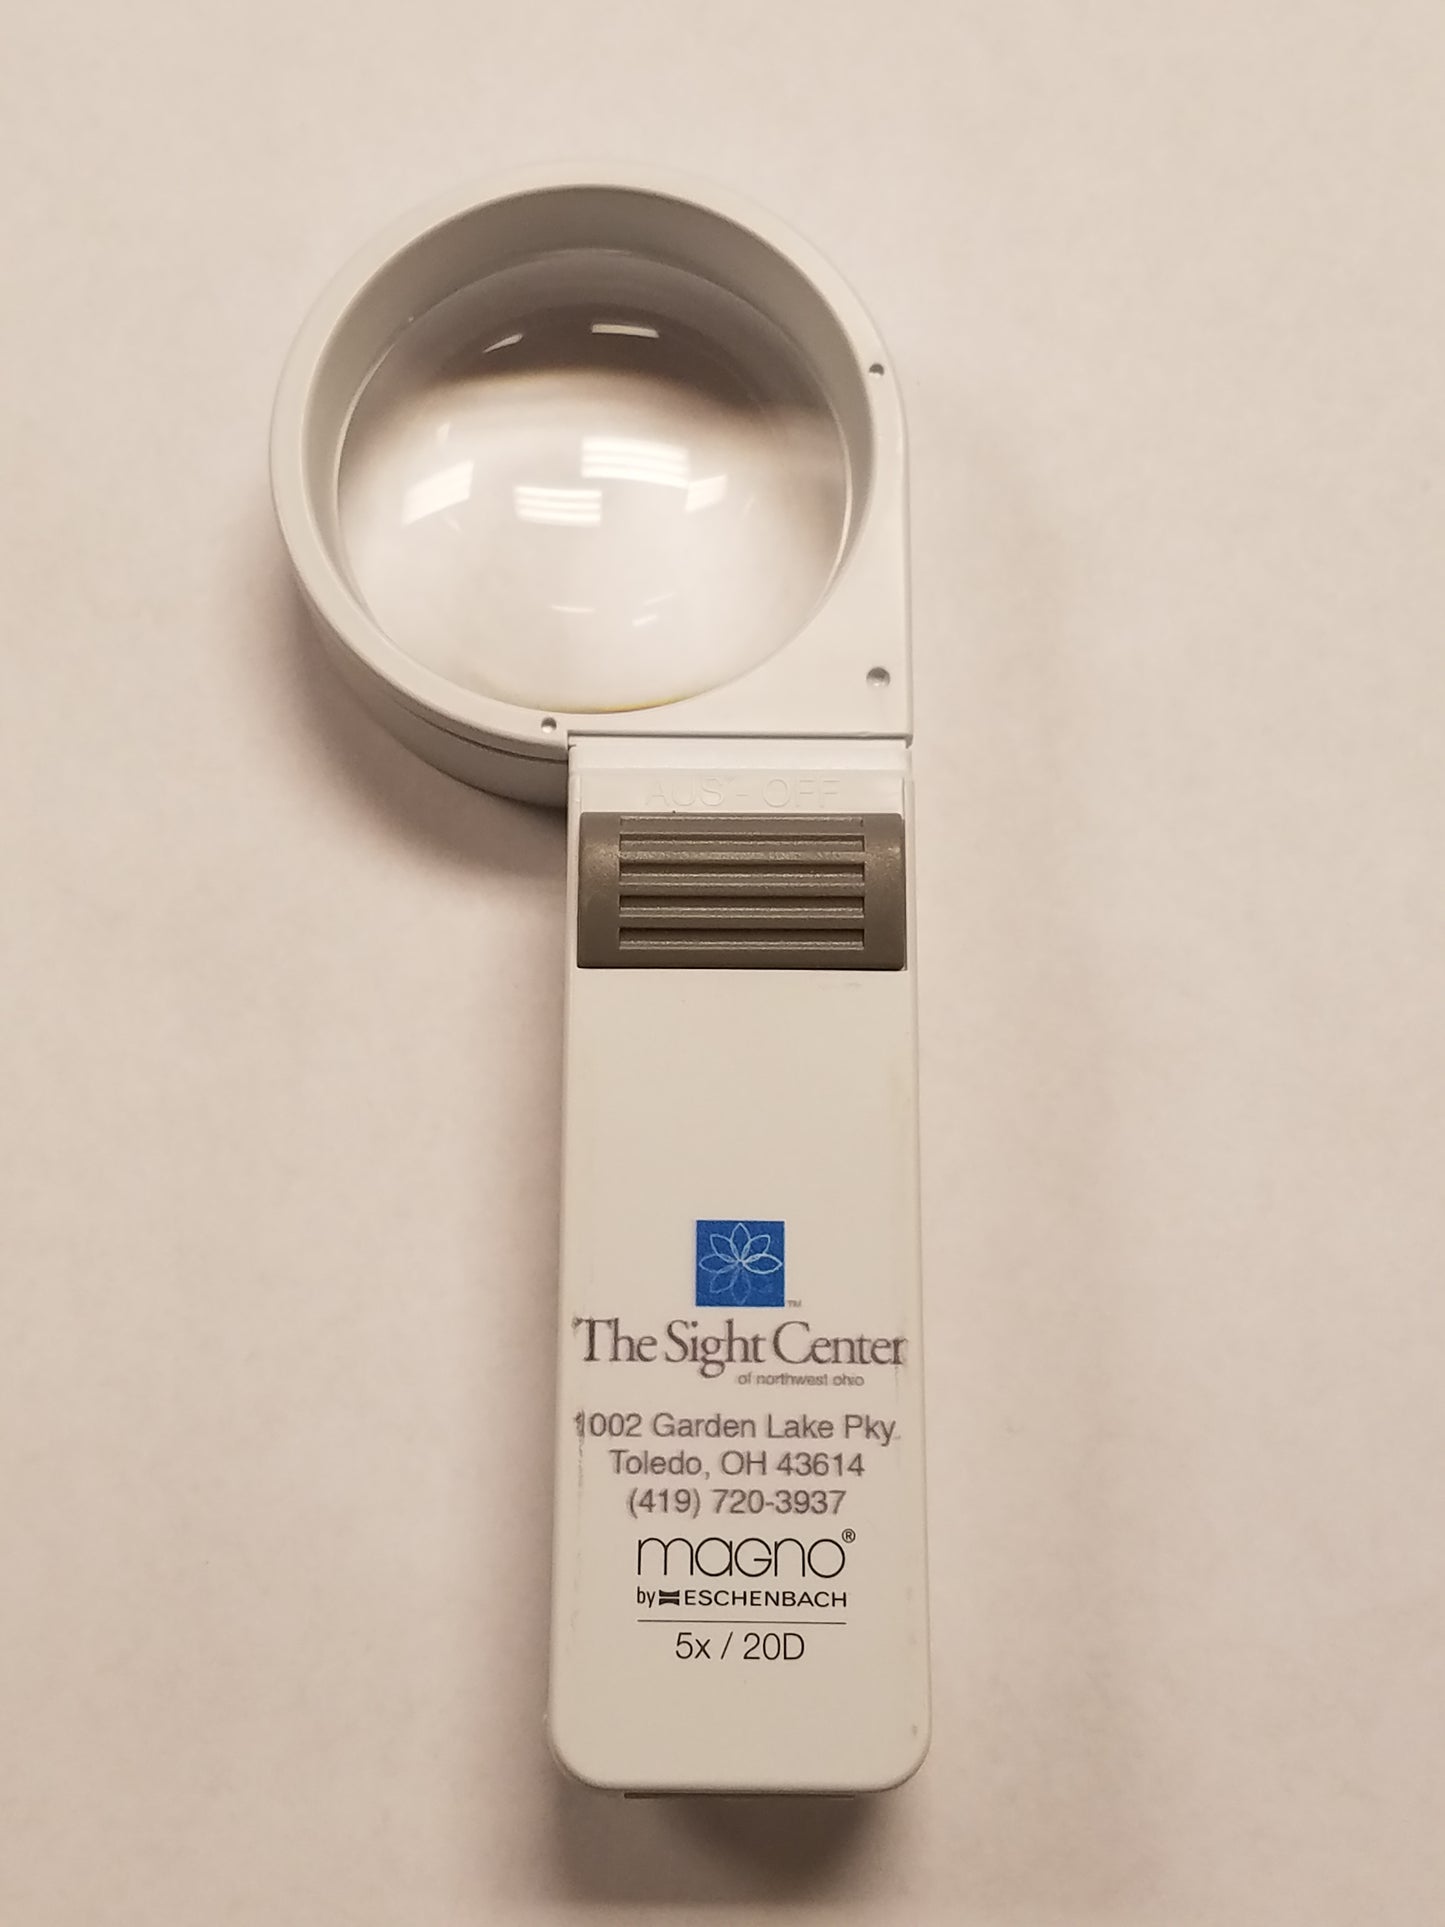 a 5x Hand Held Magnifier with the Sight Center Logo, address and phone number